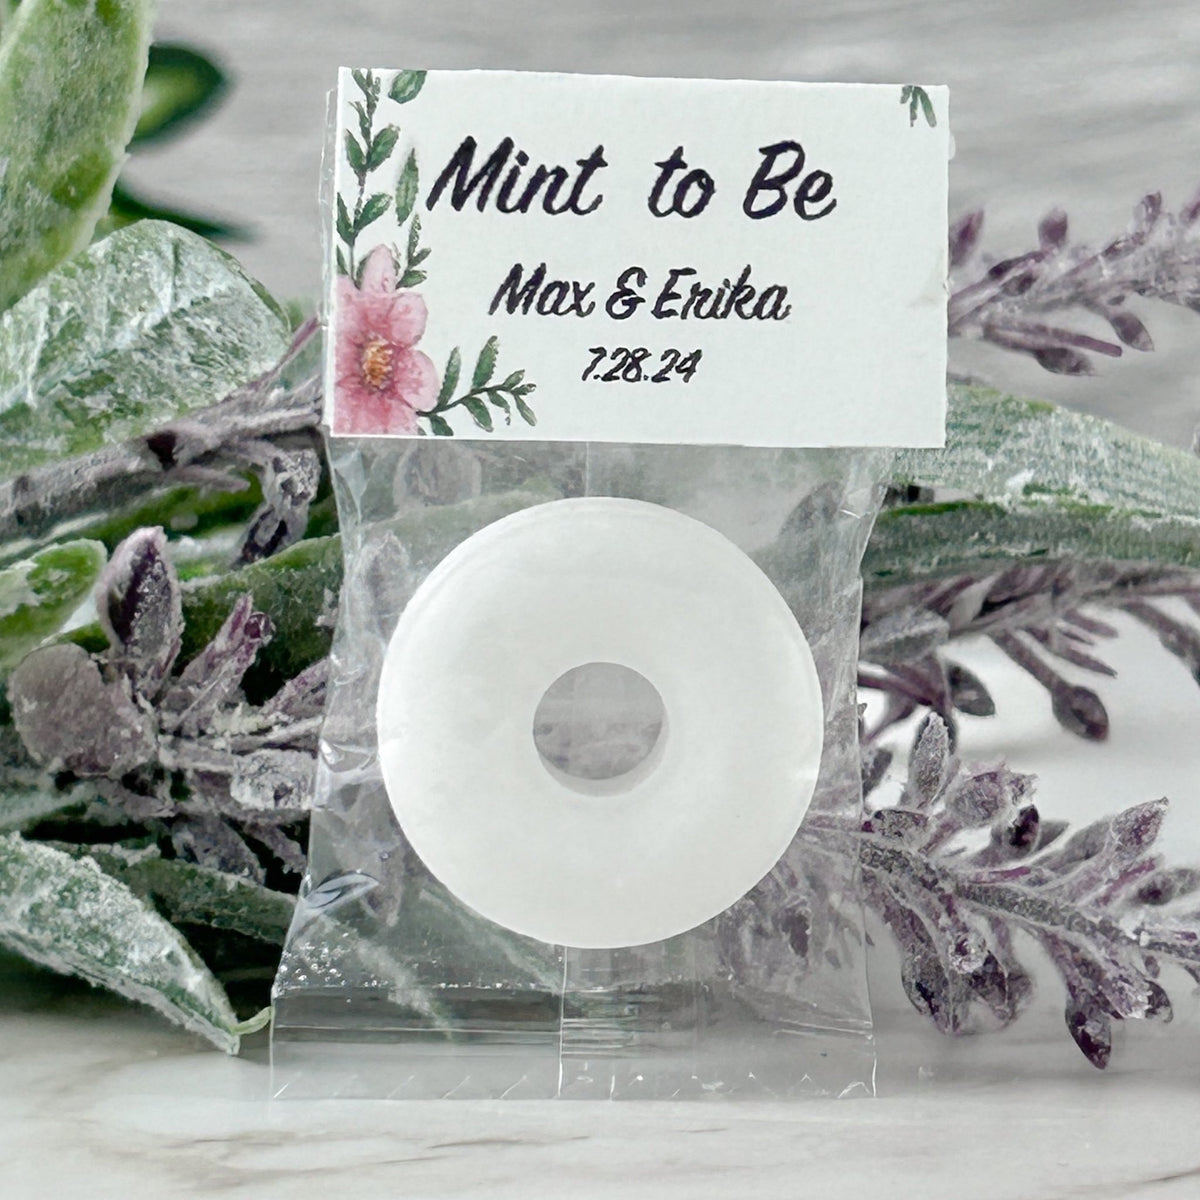 Floral Mint To Be Wedding Favors - Forever Wedding Favors